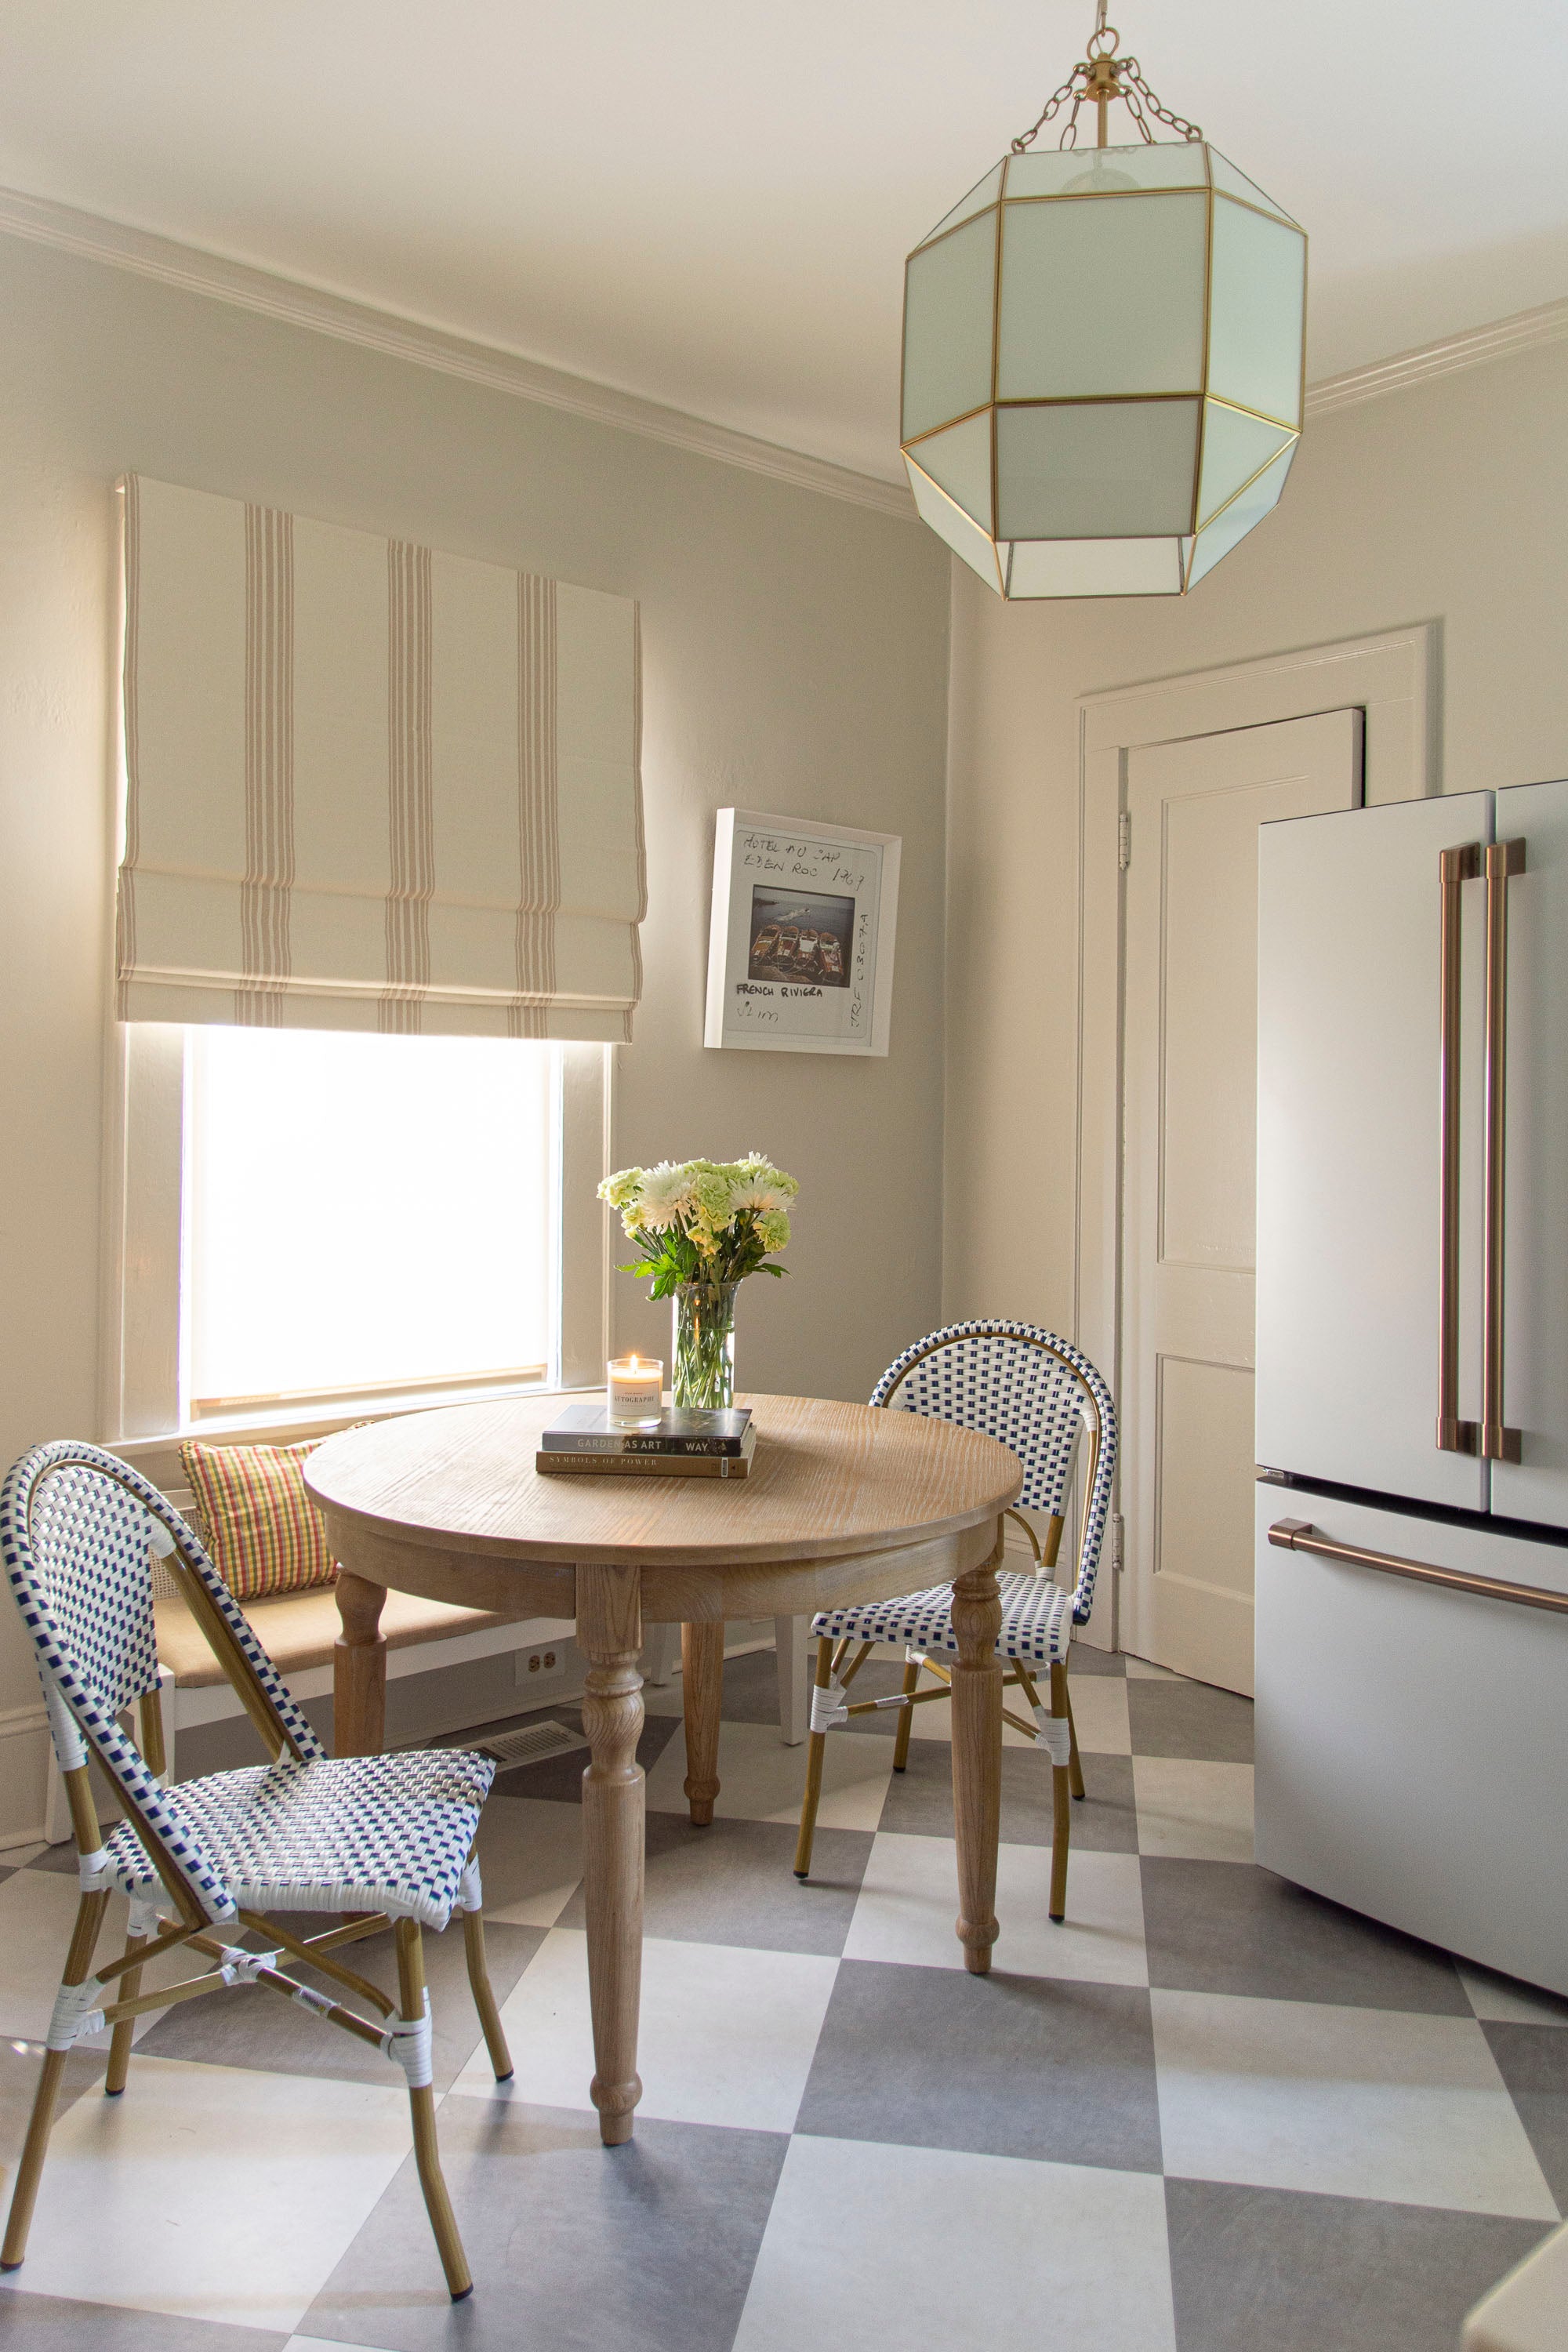 Before & After: A Bistro-Inspired Breakfast Nook